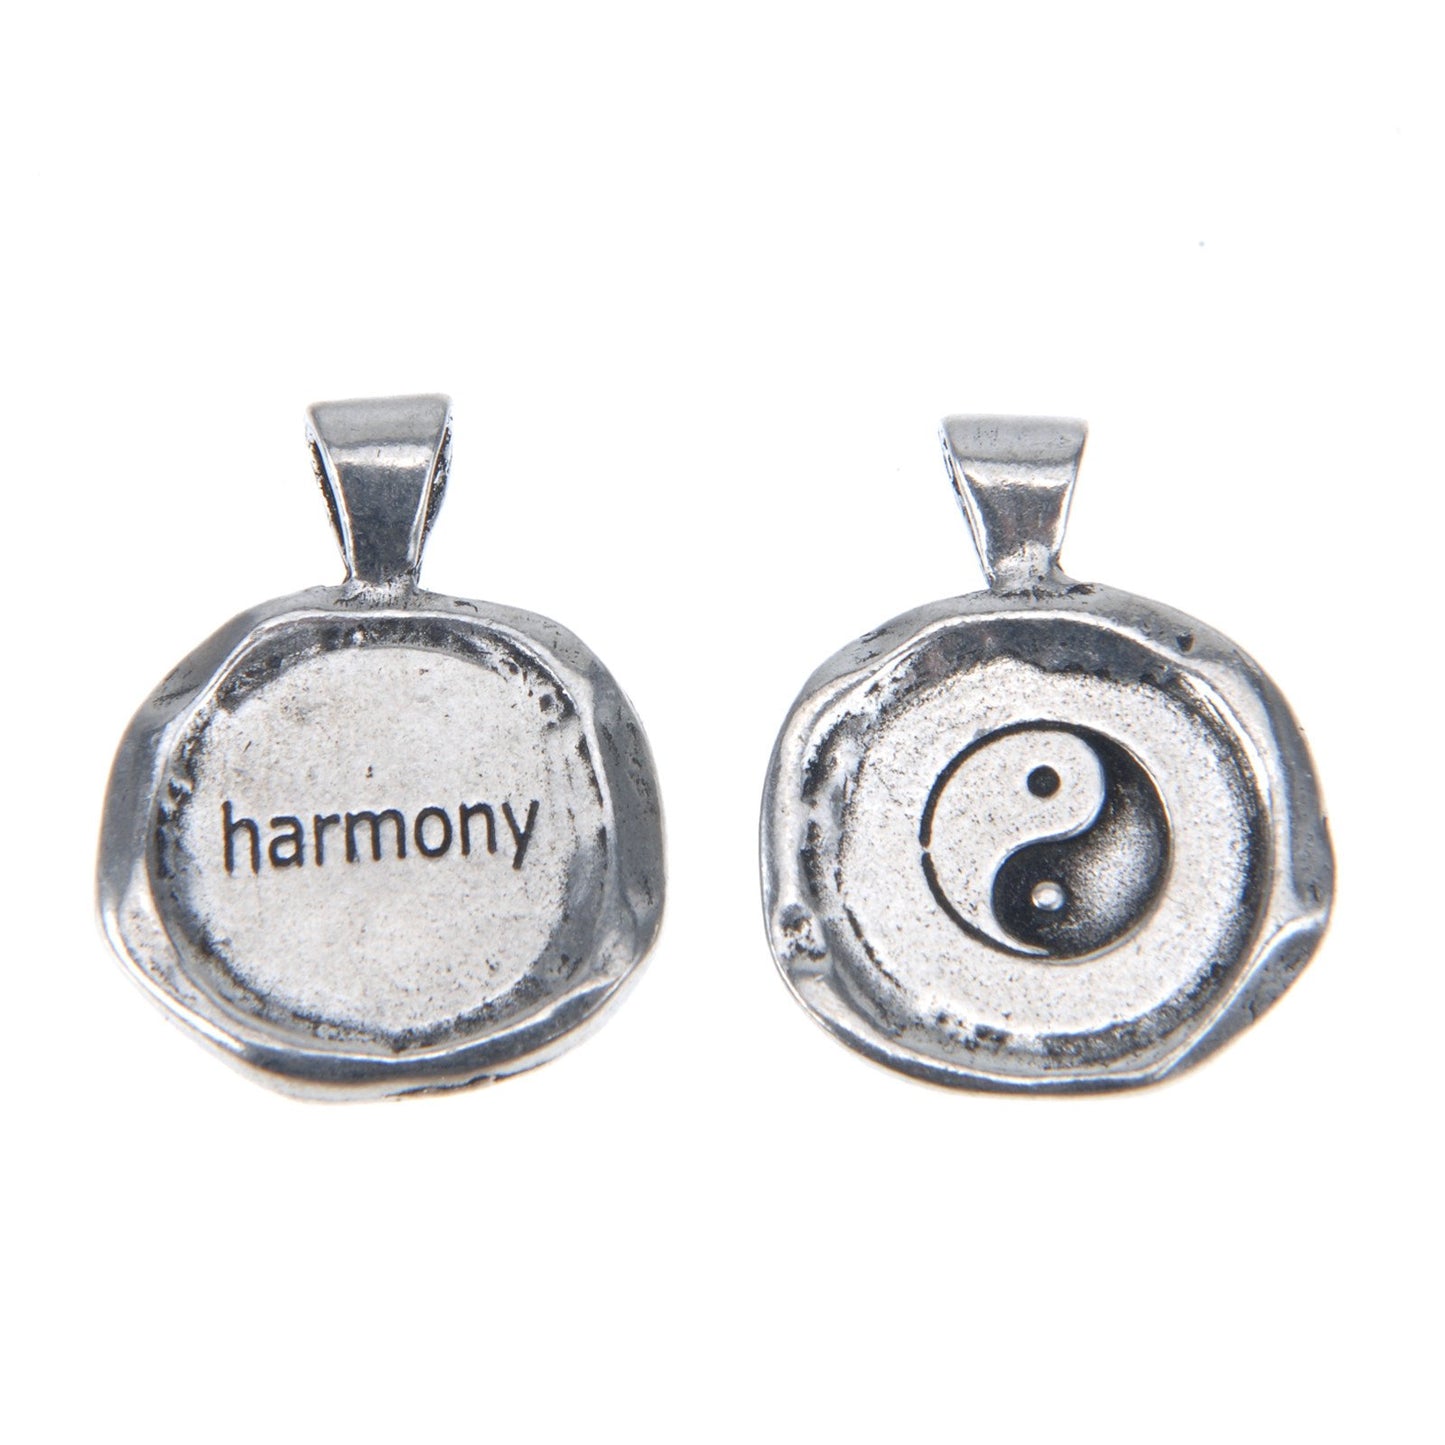 Harmony Wax Seal front and back